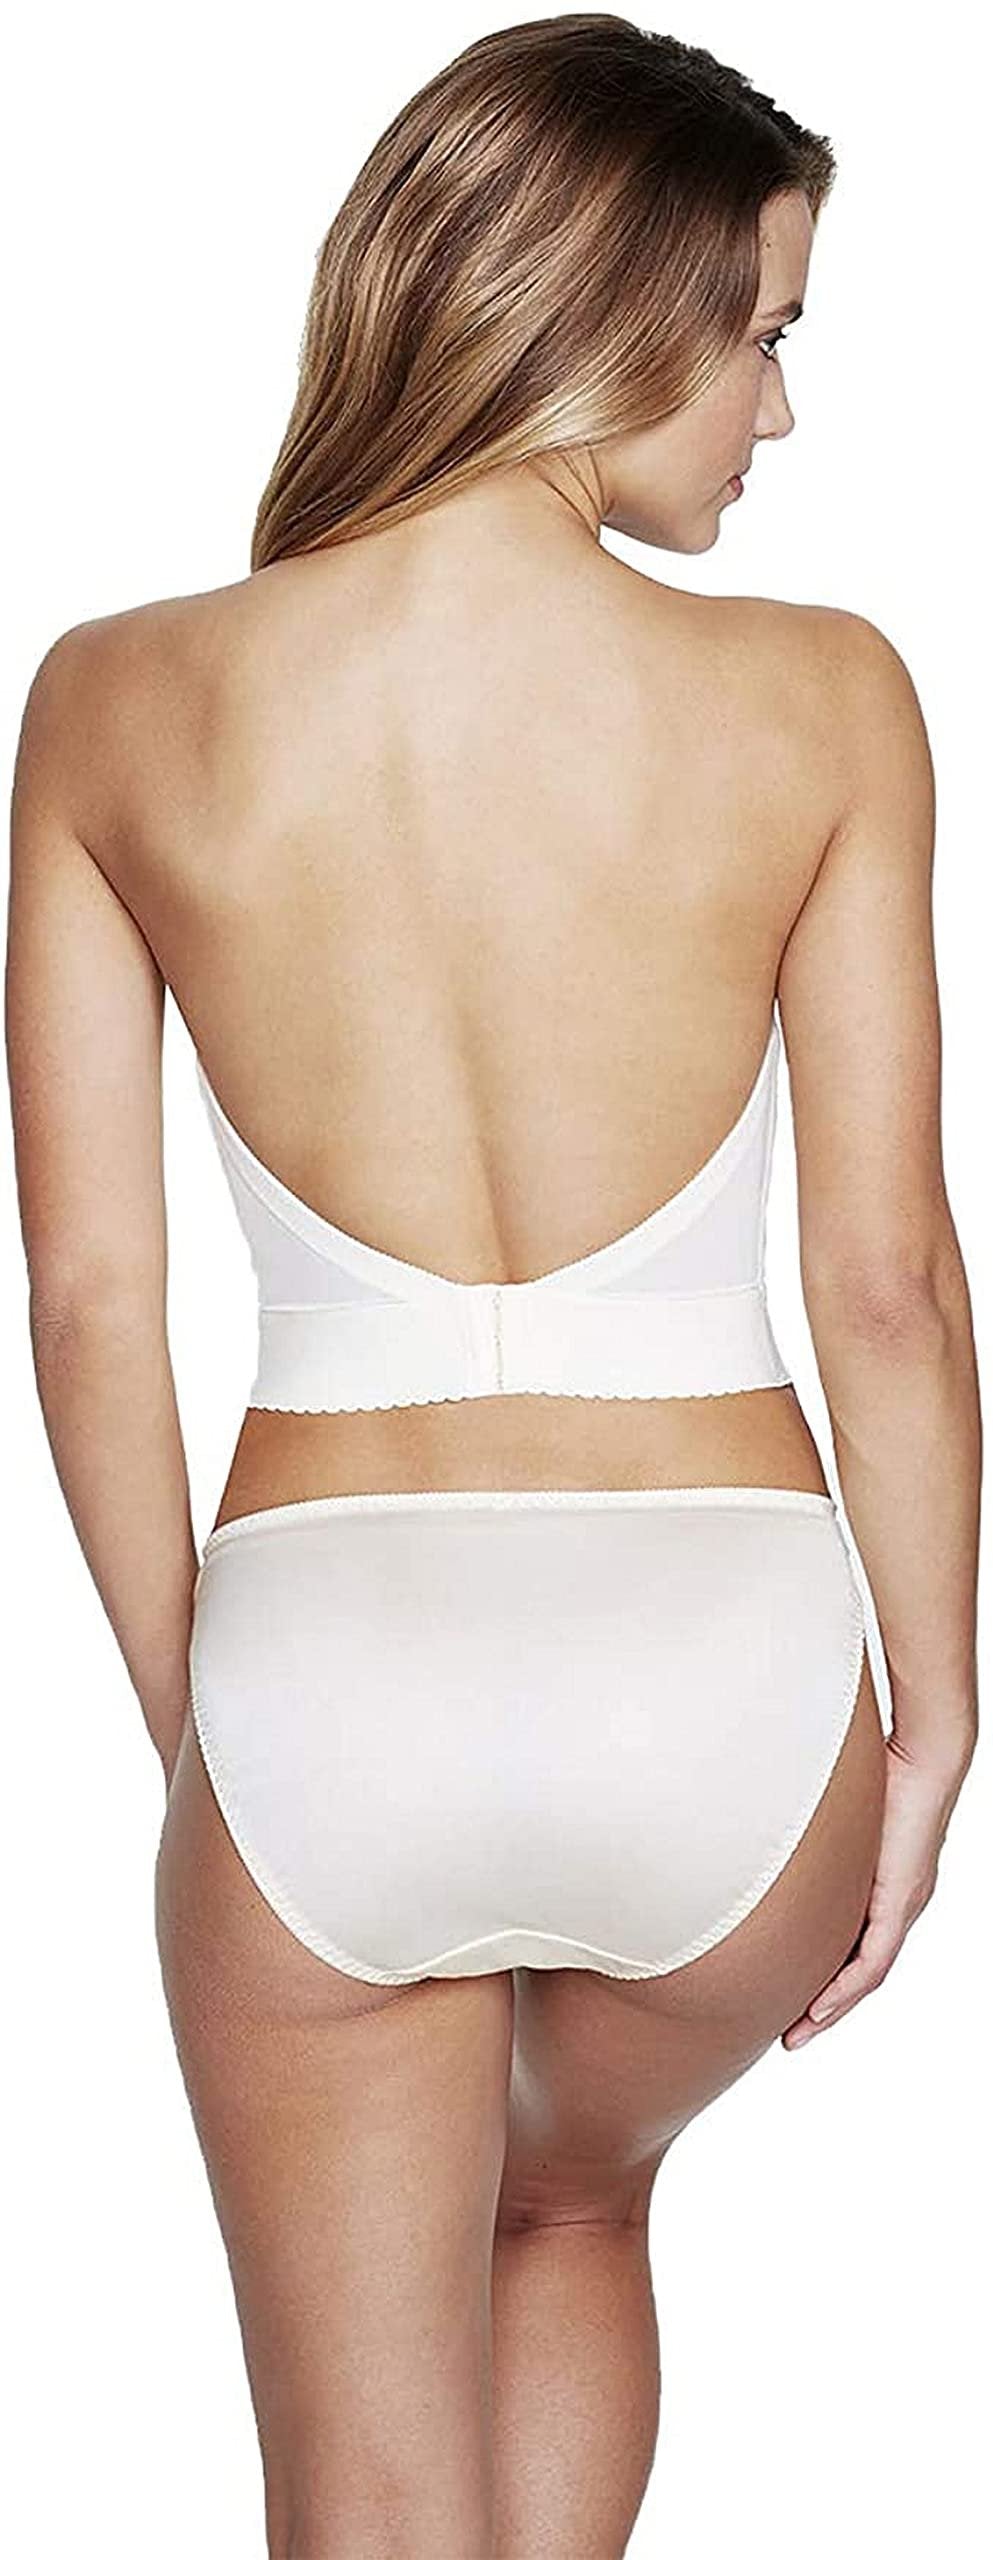 New Dominique Noemi Strapless Backless Bra Ivory 42DD - Free Shipping & Returns